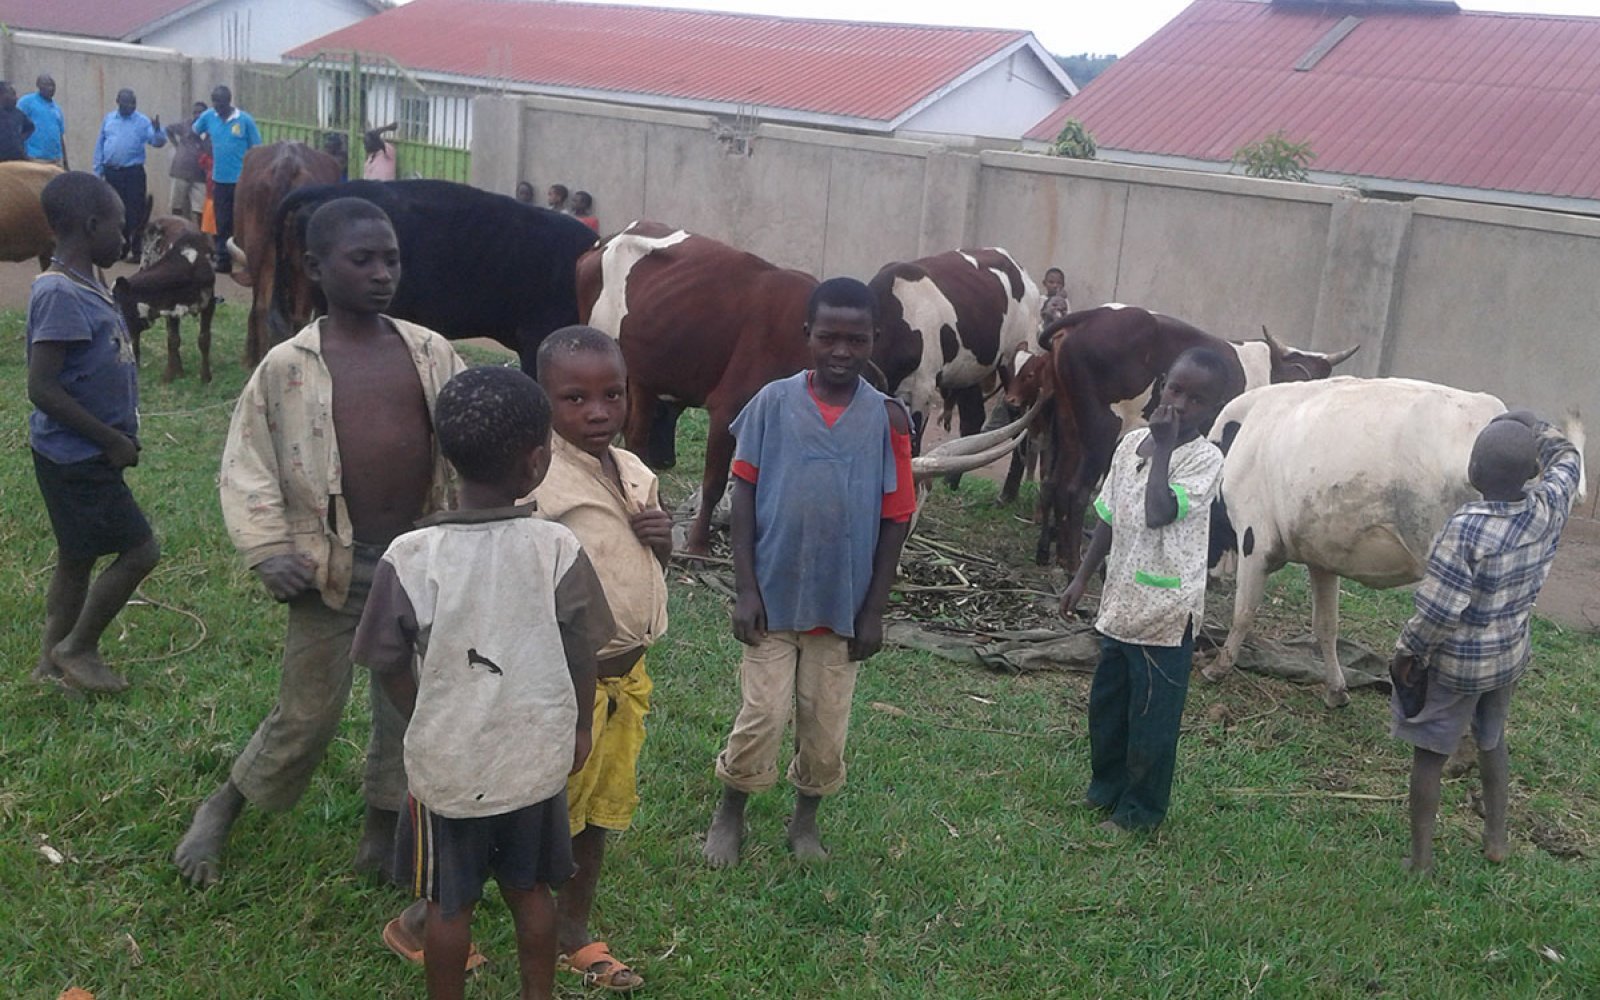 Students and Orphans with cattle at the Trade School